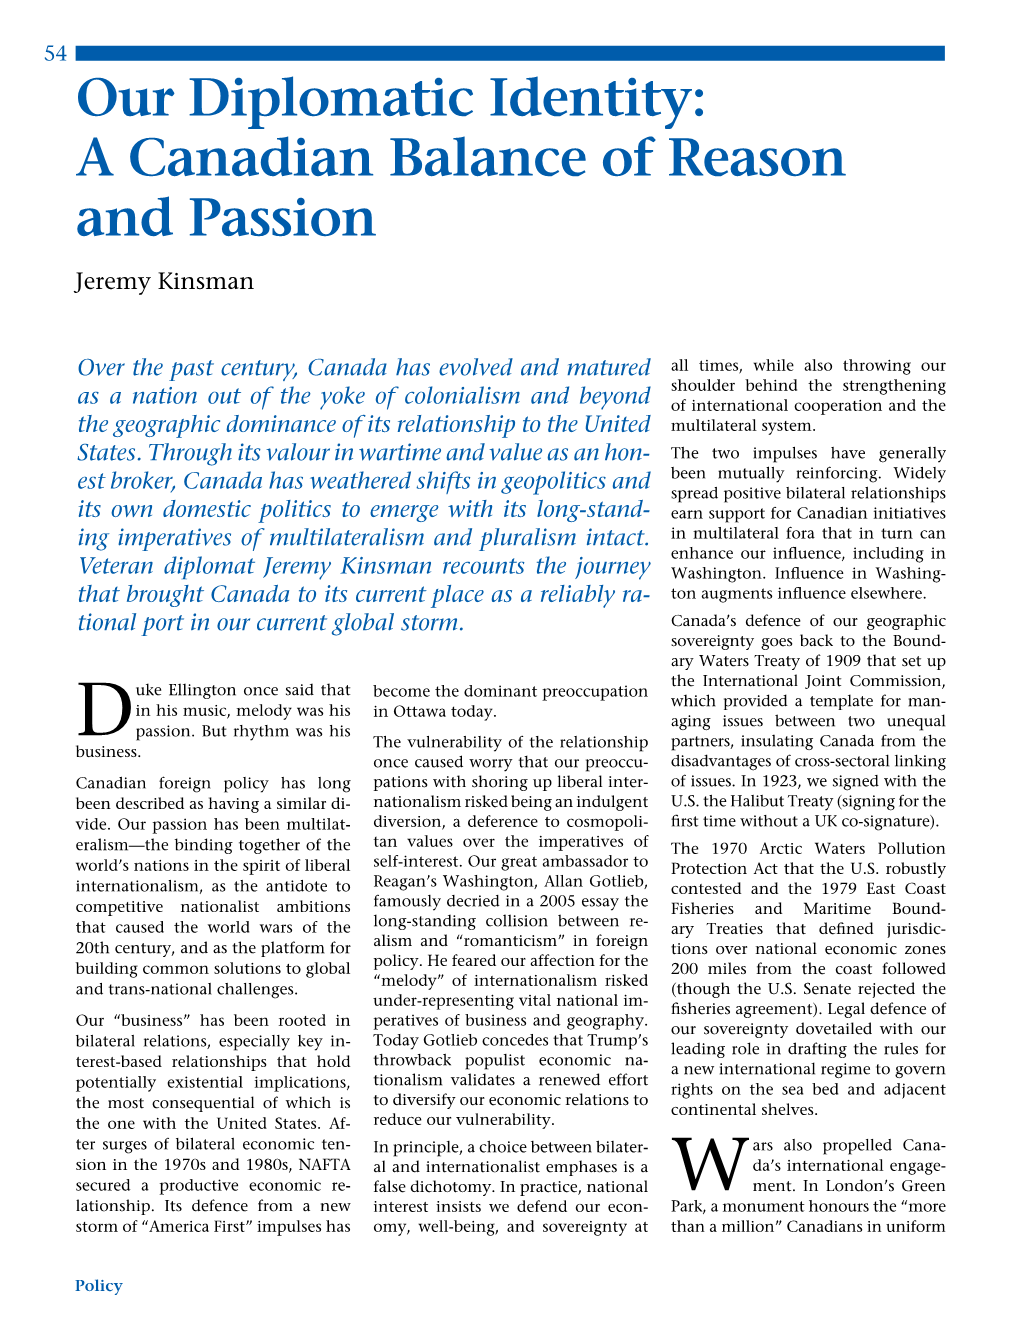 Our Diplomatic Identity: a Canadian Balance of Reason and Passion Jeremy Kinsman